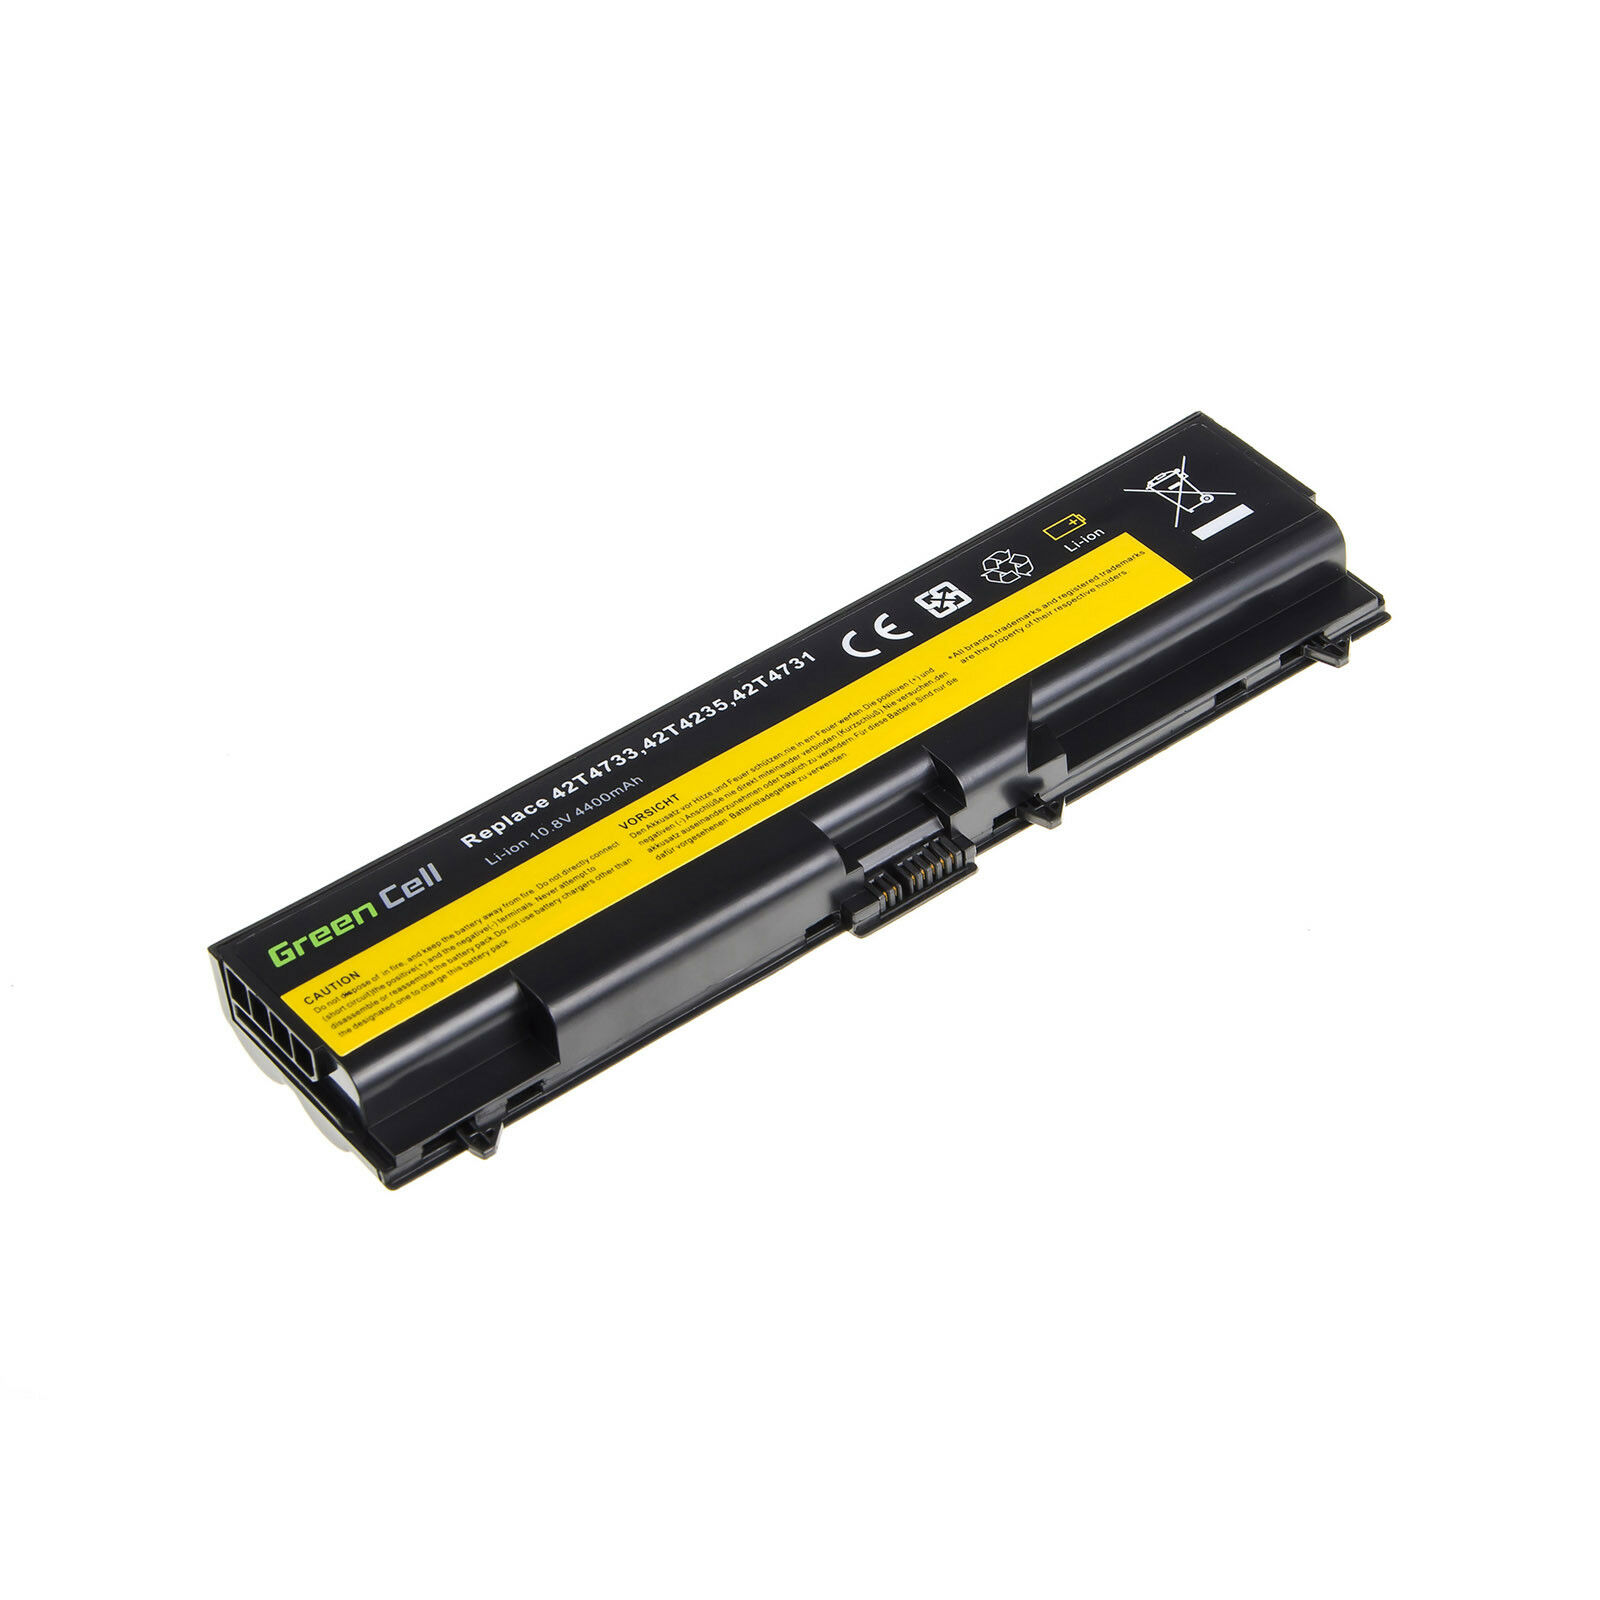 Accu voor Lenovo Thinkpad T530 T430 W530 L530 L430 42T4235 57Y4186 0A36302(compatible)